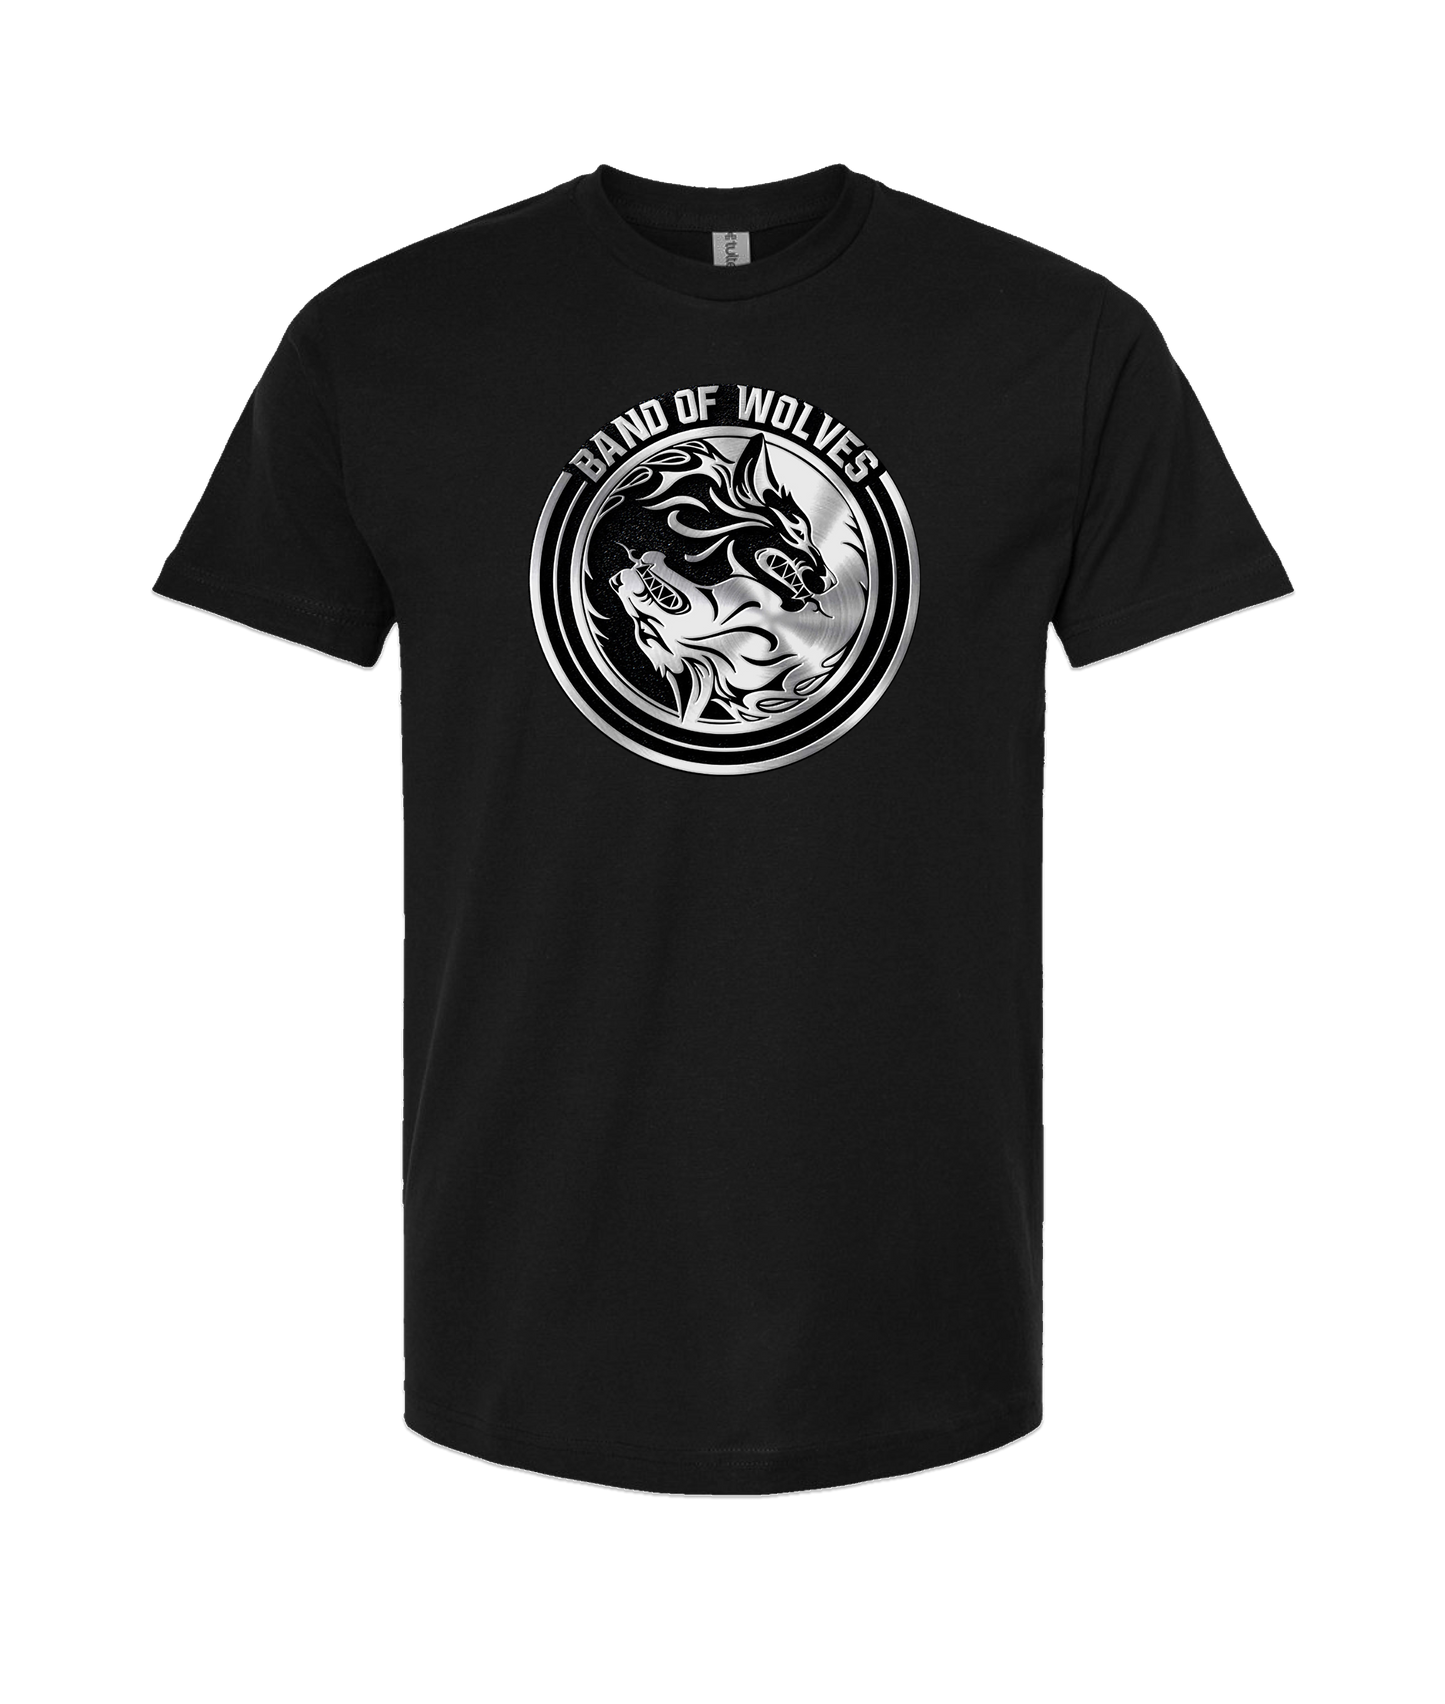 Band of Wolves - The Wolf - Black T Shirt